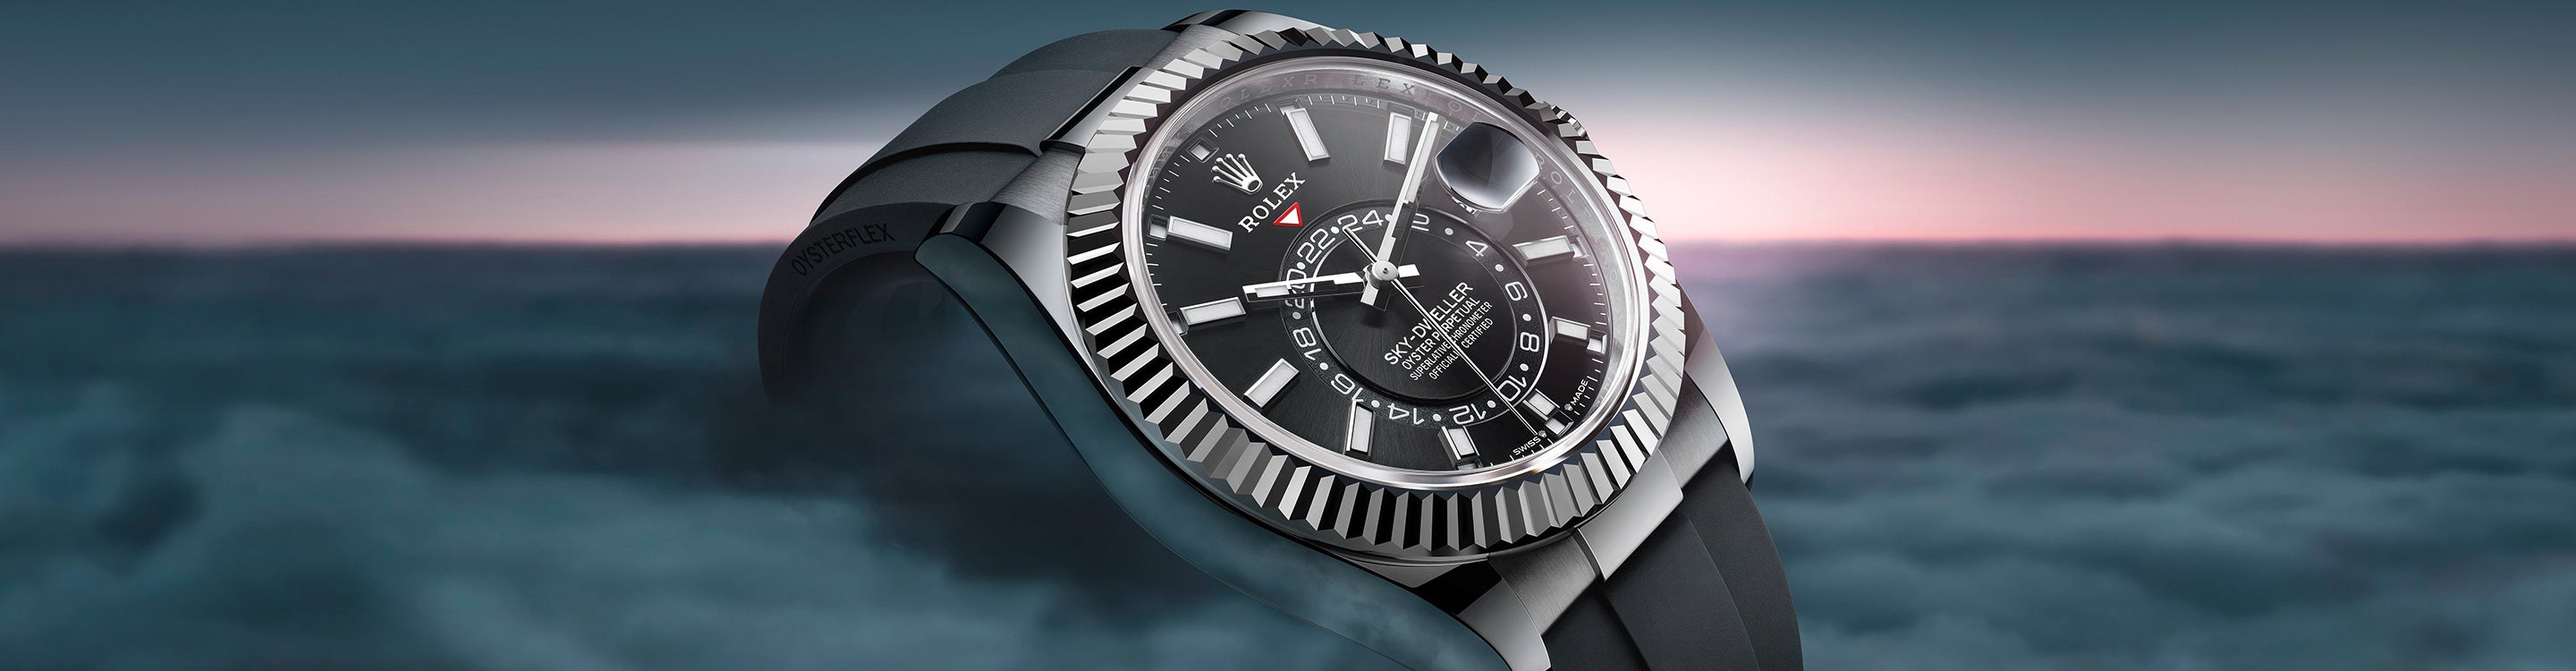 Rolex Sky-Dweller on Side in Clouds at Sunset